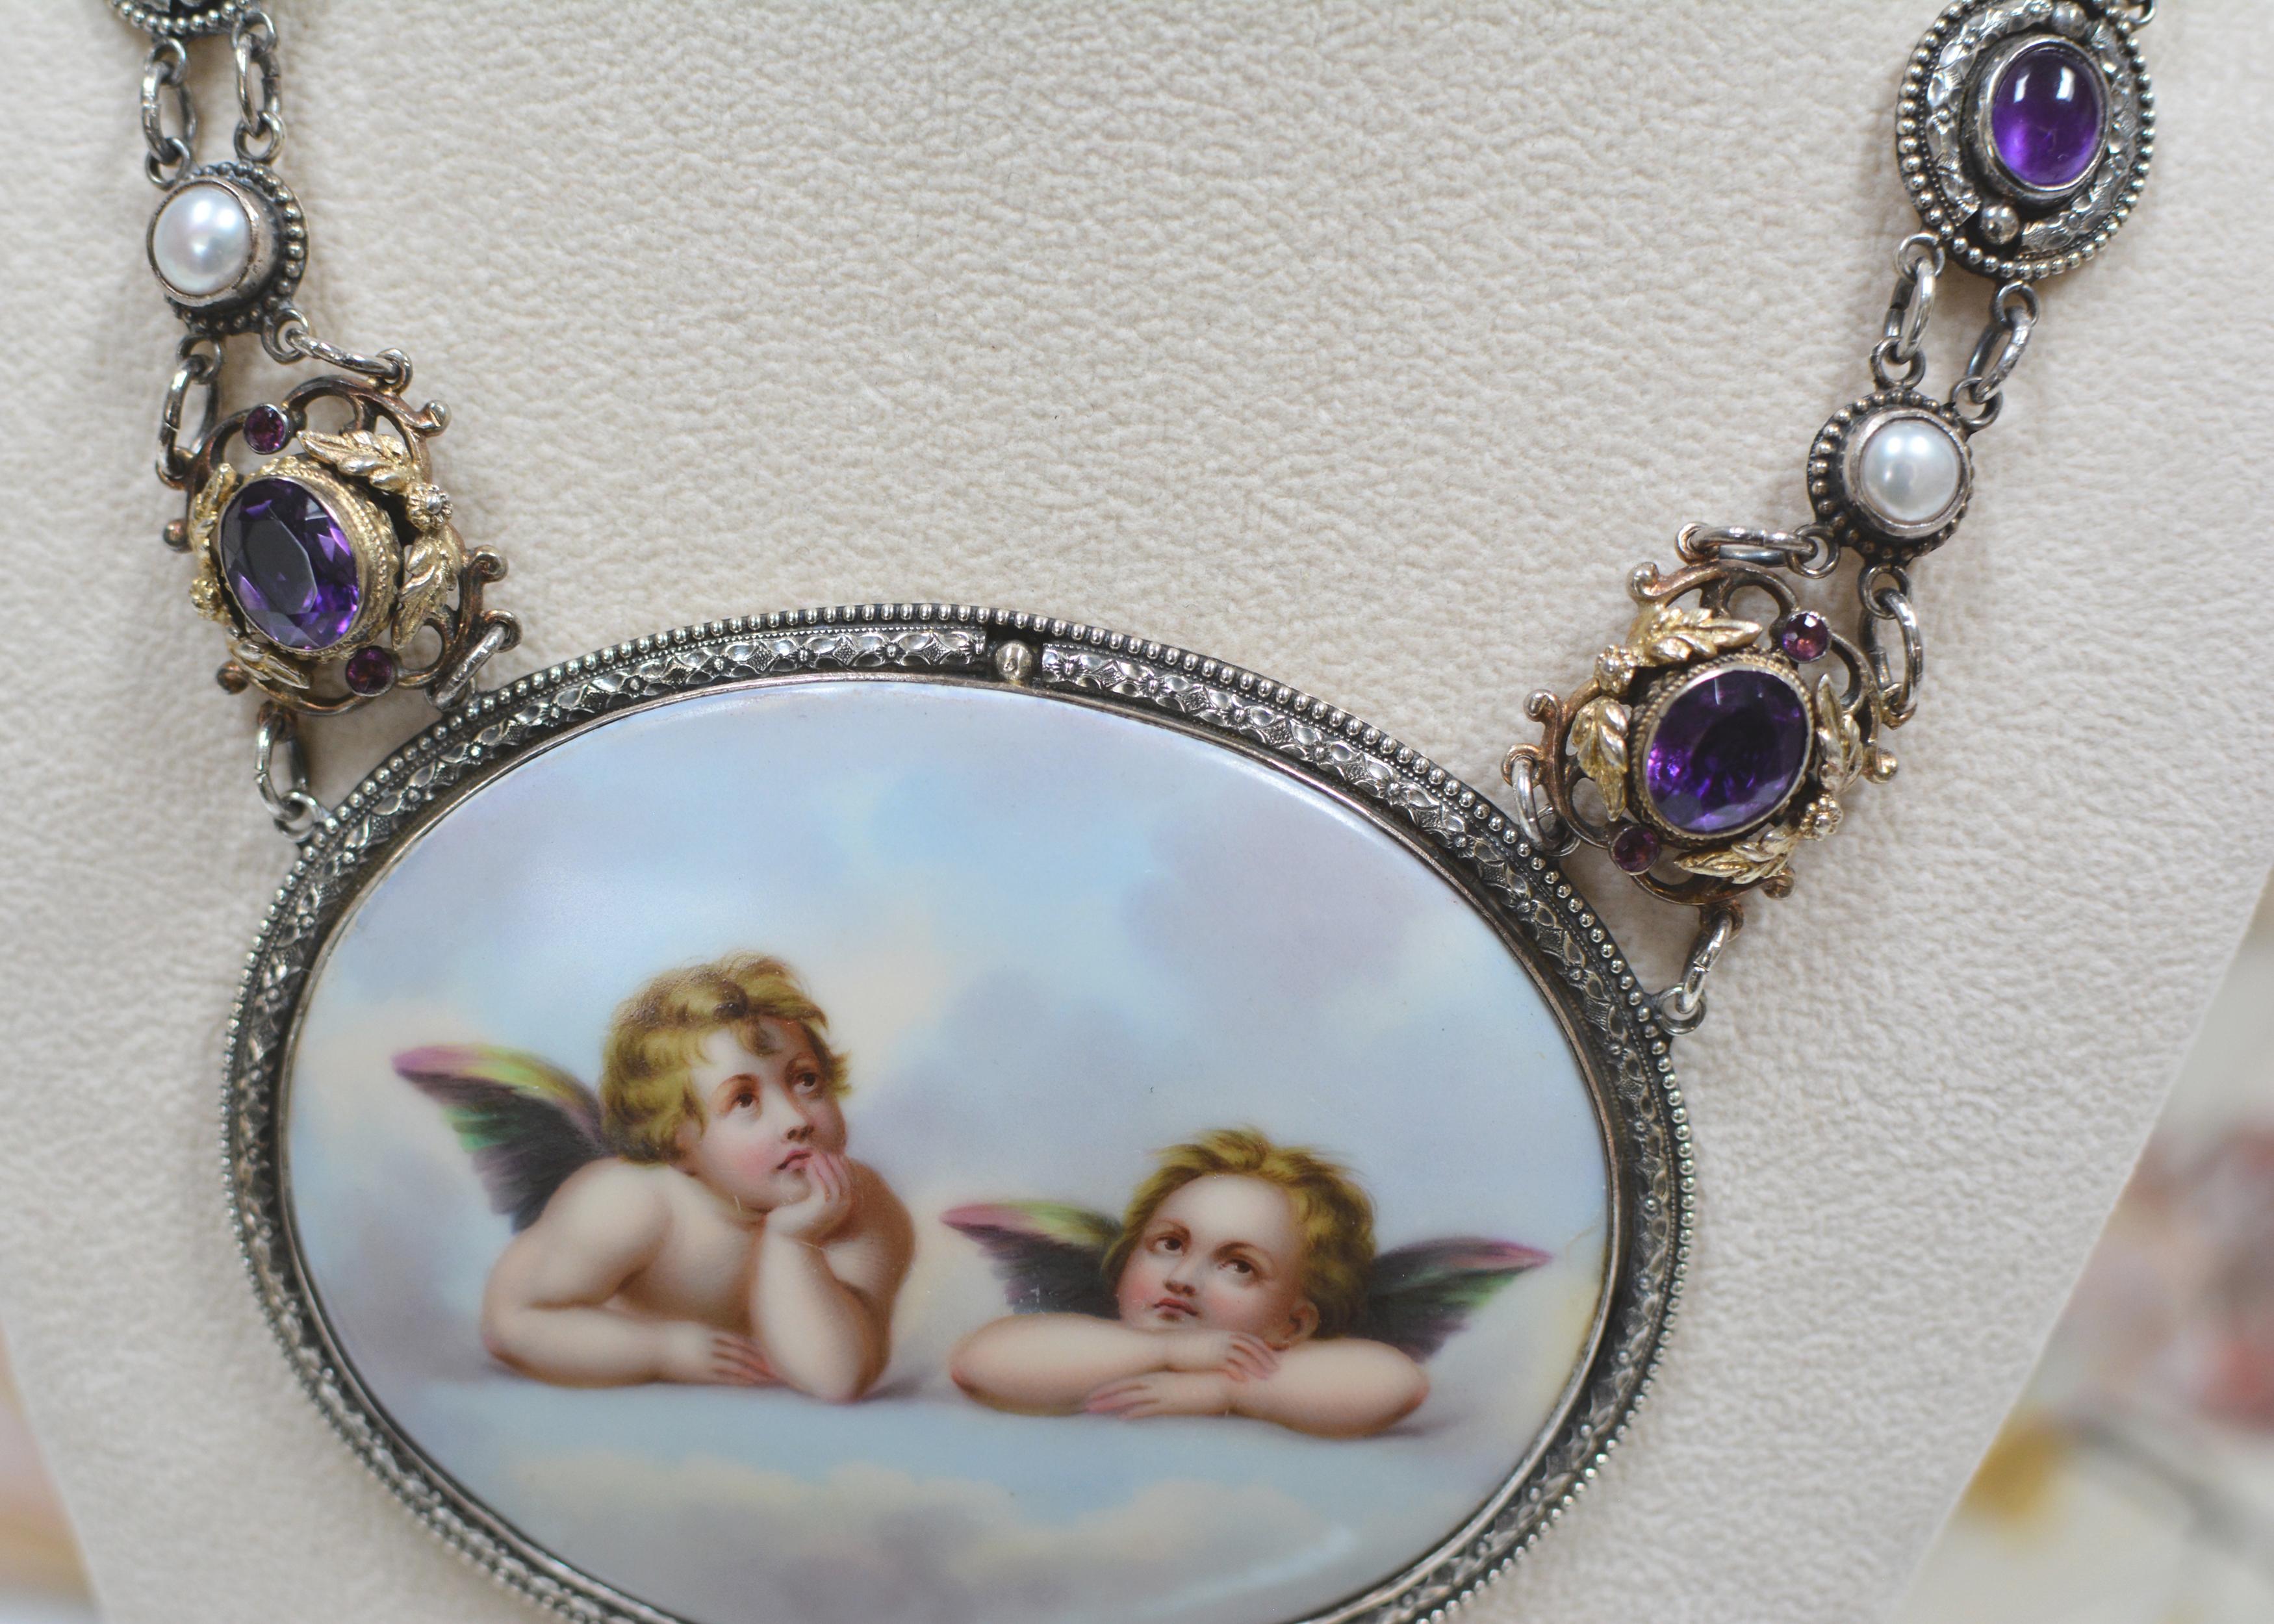 Women's or Men's Jill Garber 19th Century Sistine Madonna Angels Portrait Necklace with Amethyst For Sale